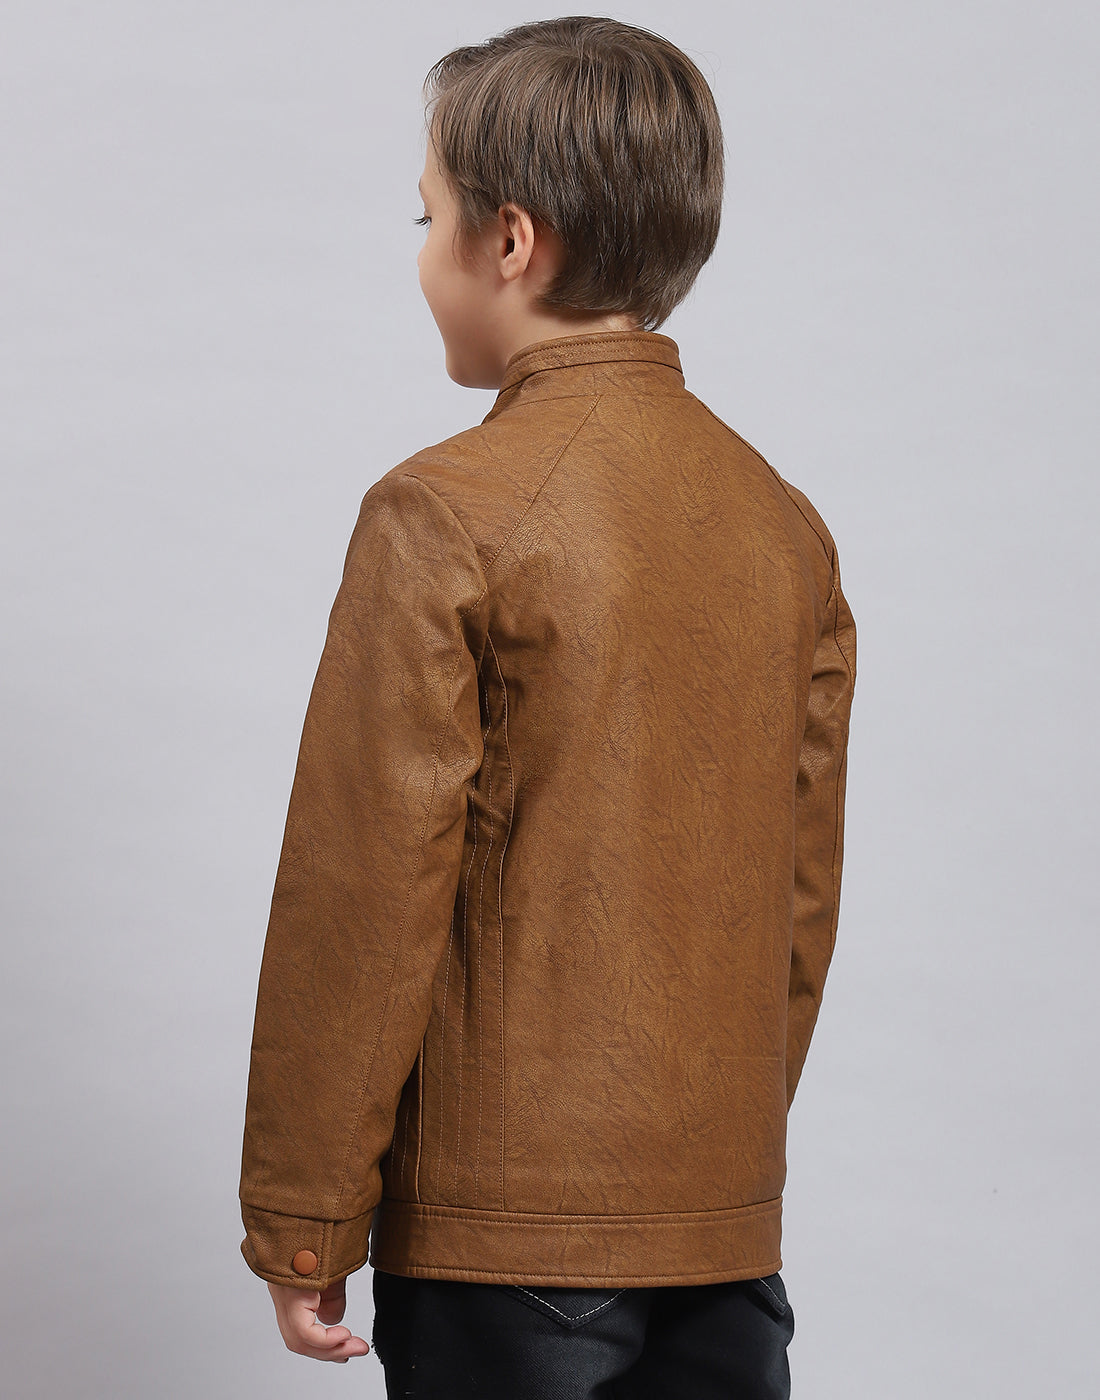 Boys Brown Solid Stand Collar Full Sleeve Boys Jacket